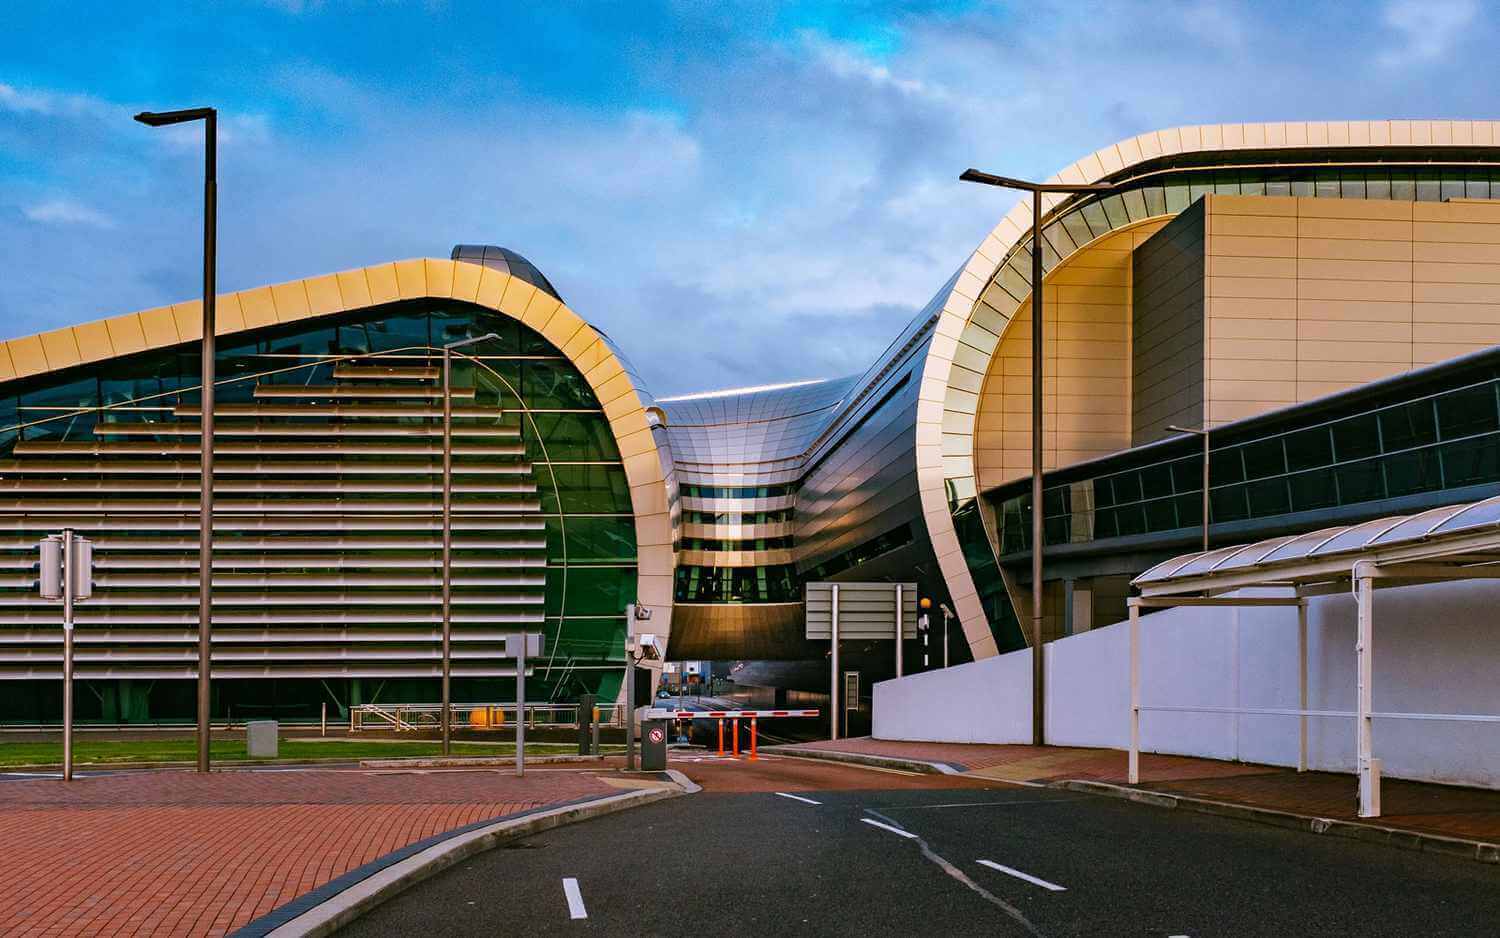 The entrance to one of the terminals at the Dublin Airport